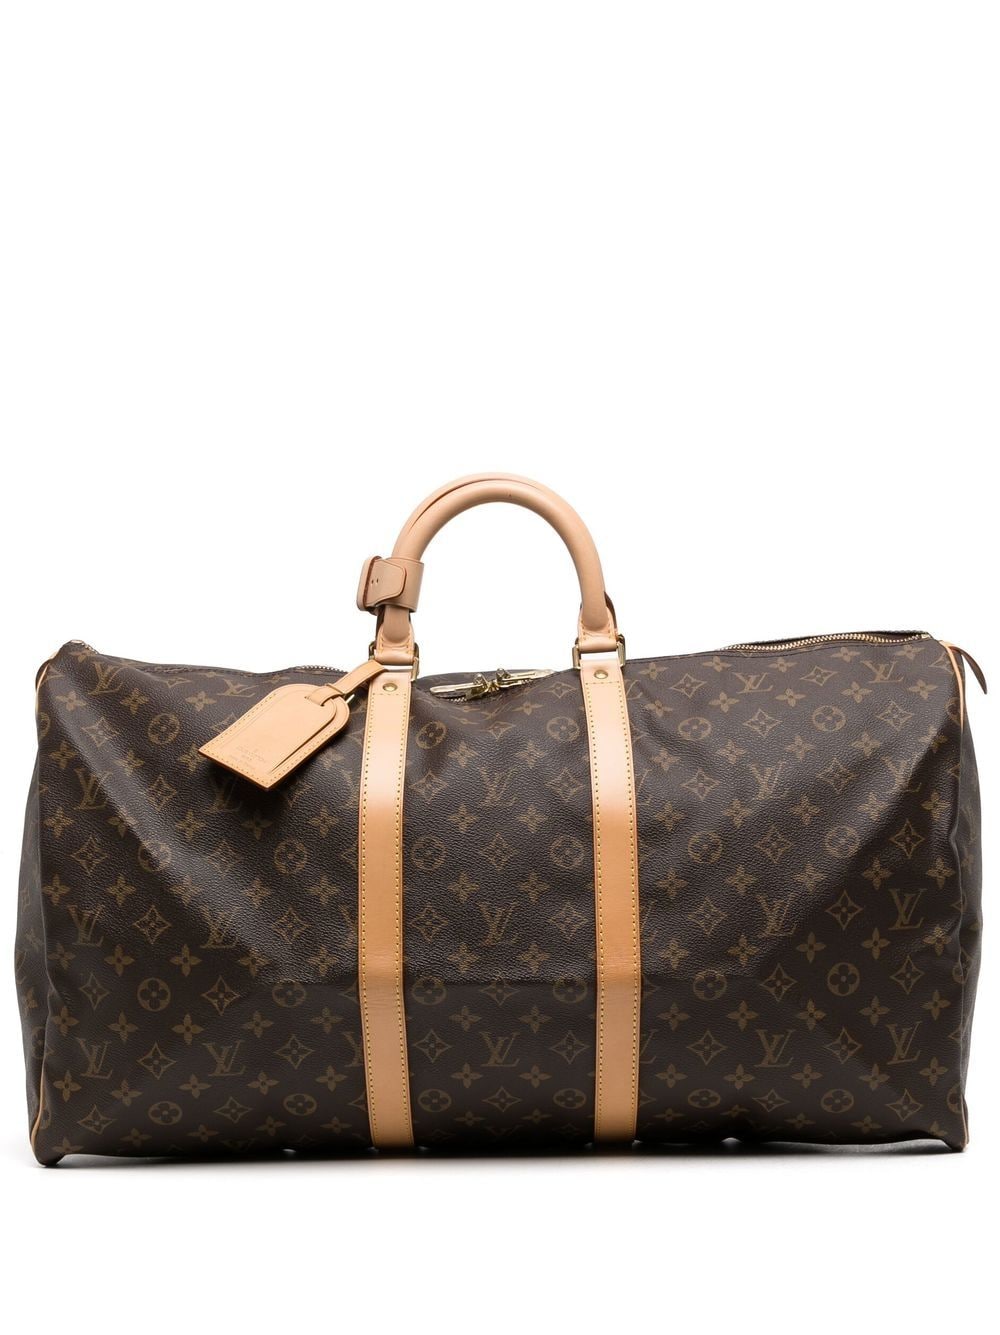 Louis Vuitton 1996 pre-owned Keepall 55 travel bag